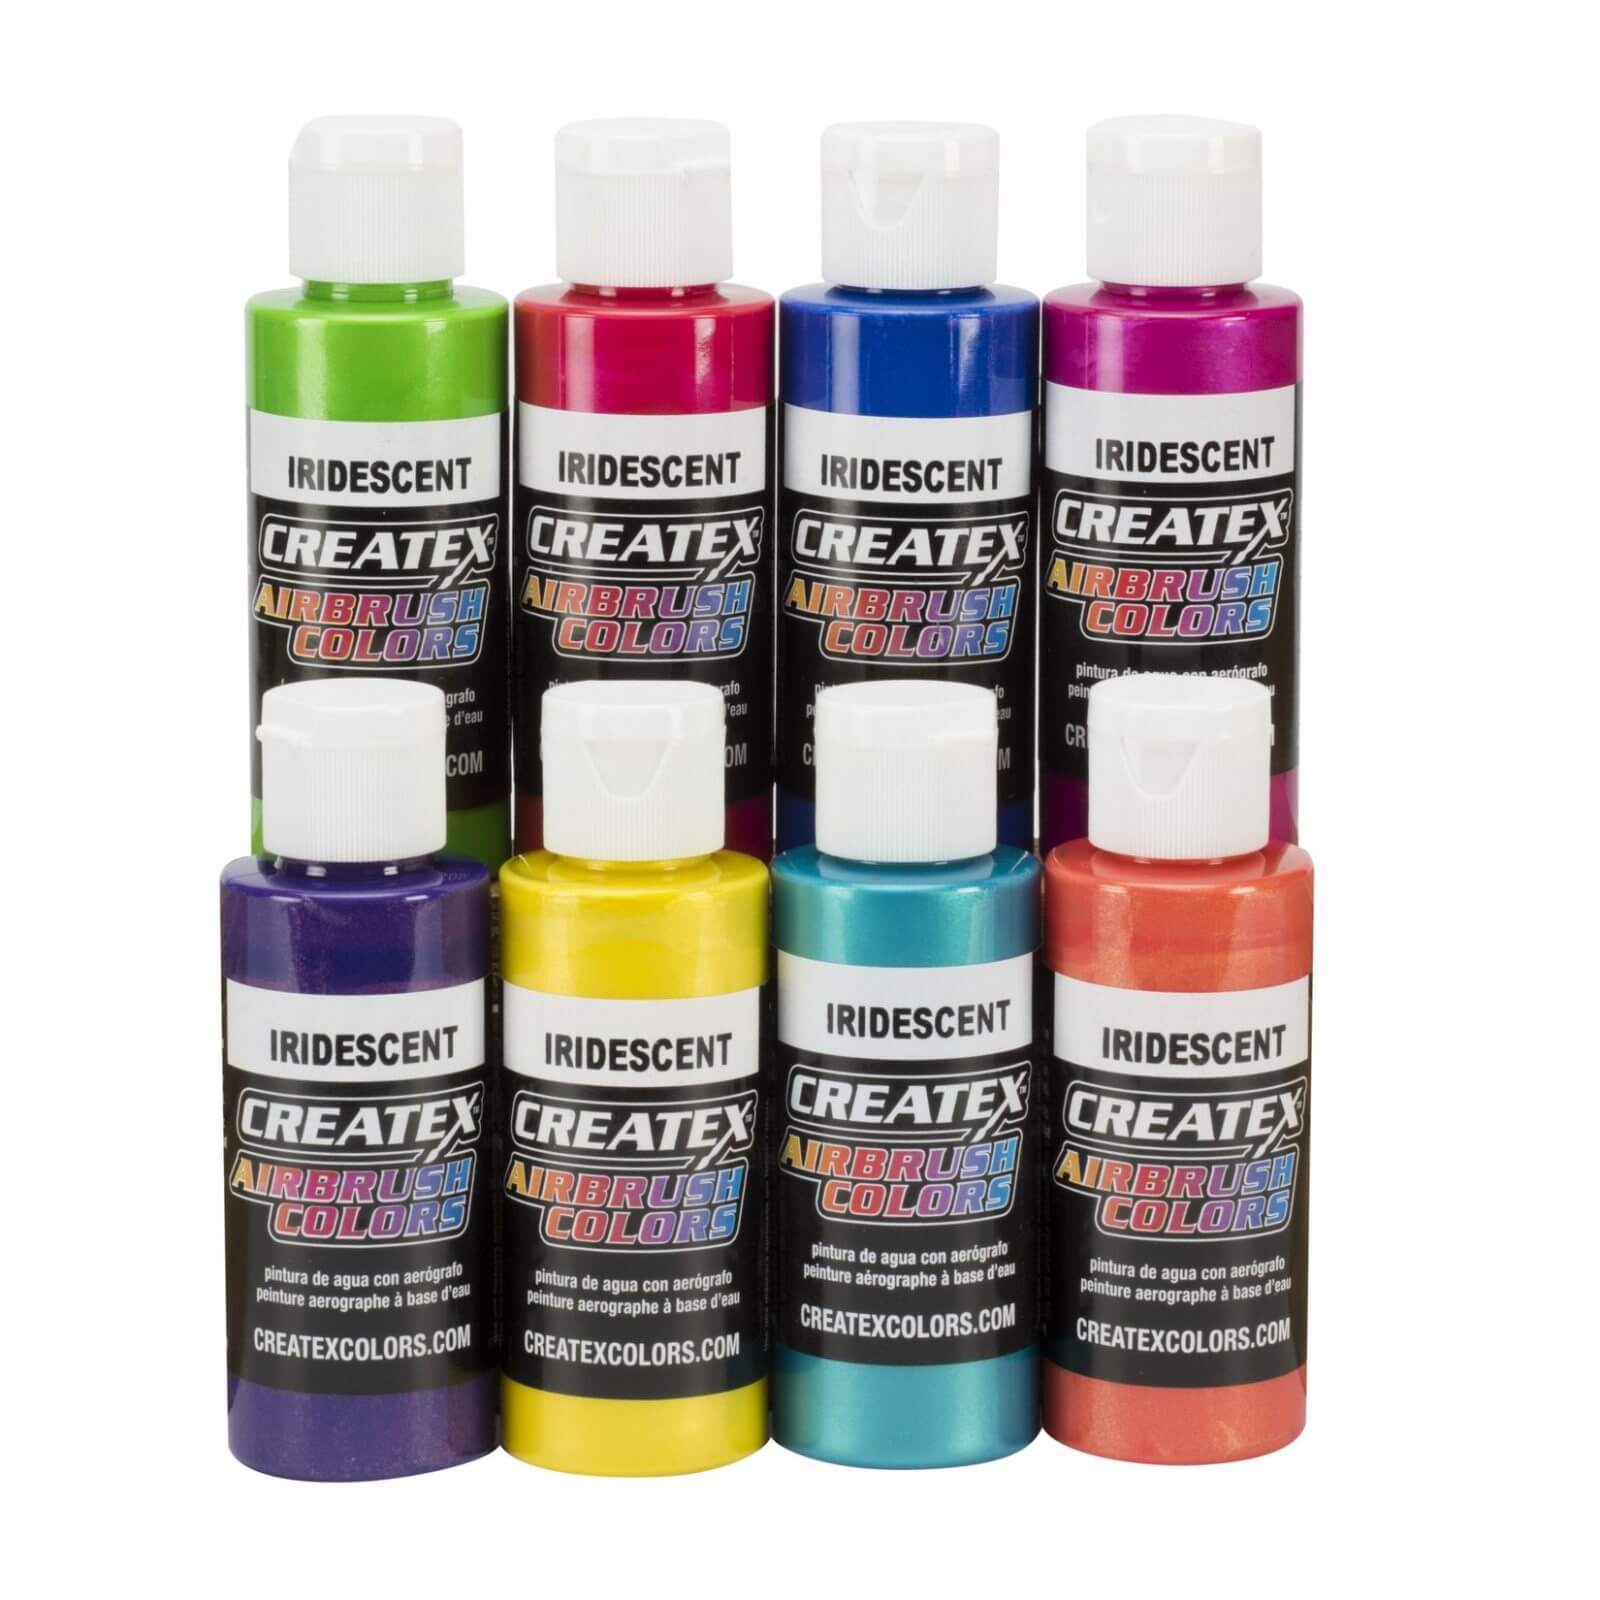 5825-02 AB Iridescents (8 colors) - Airbrush Paint Direct